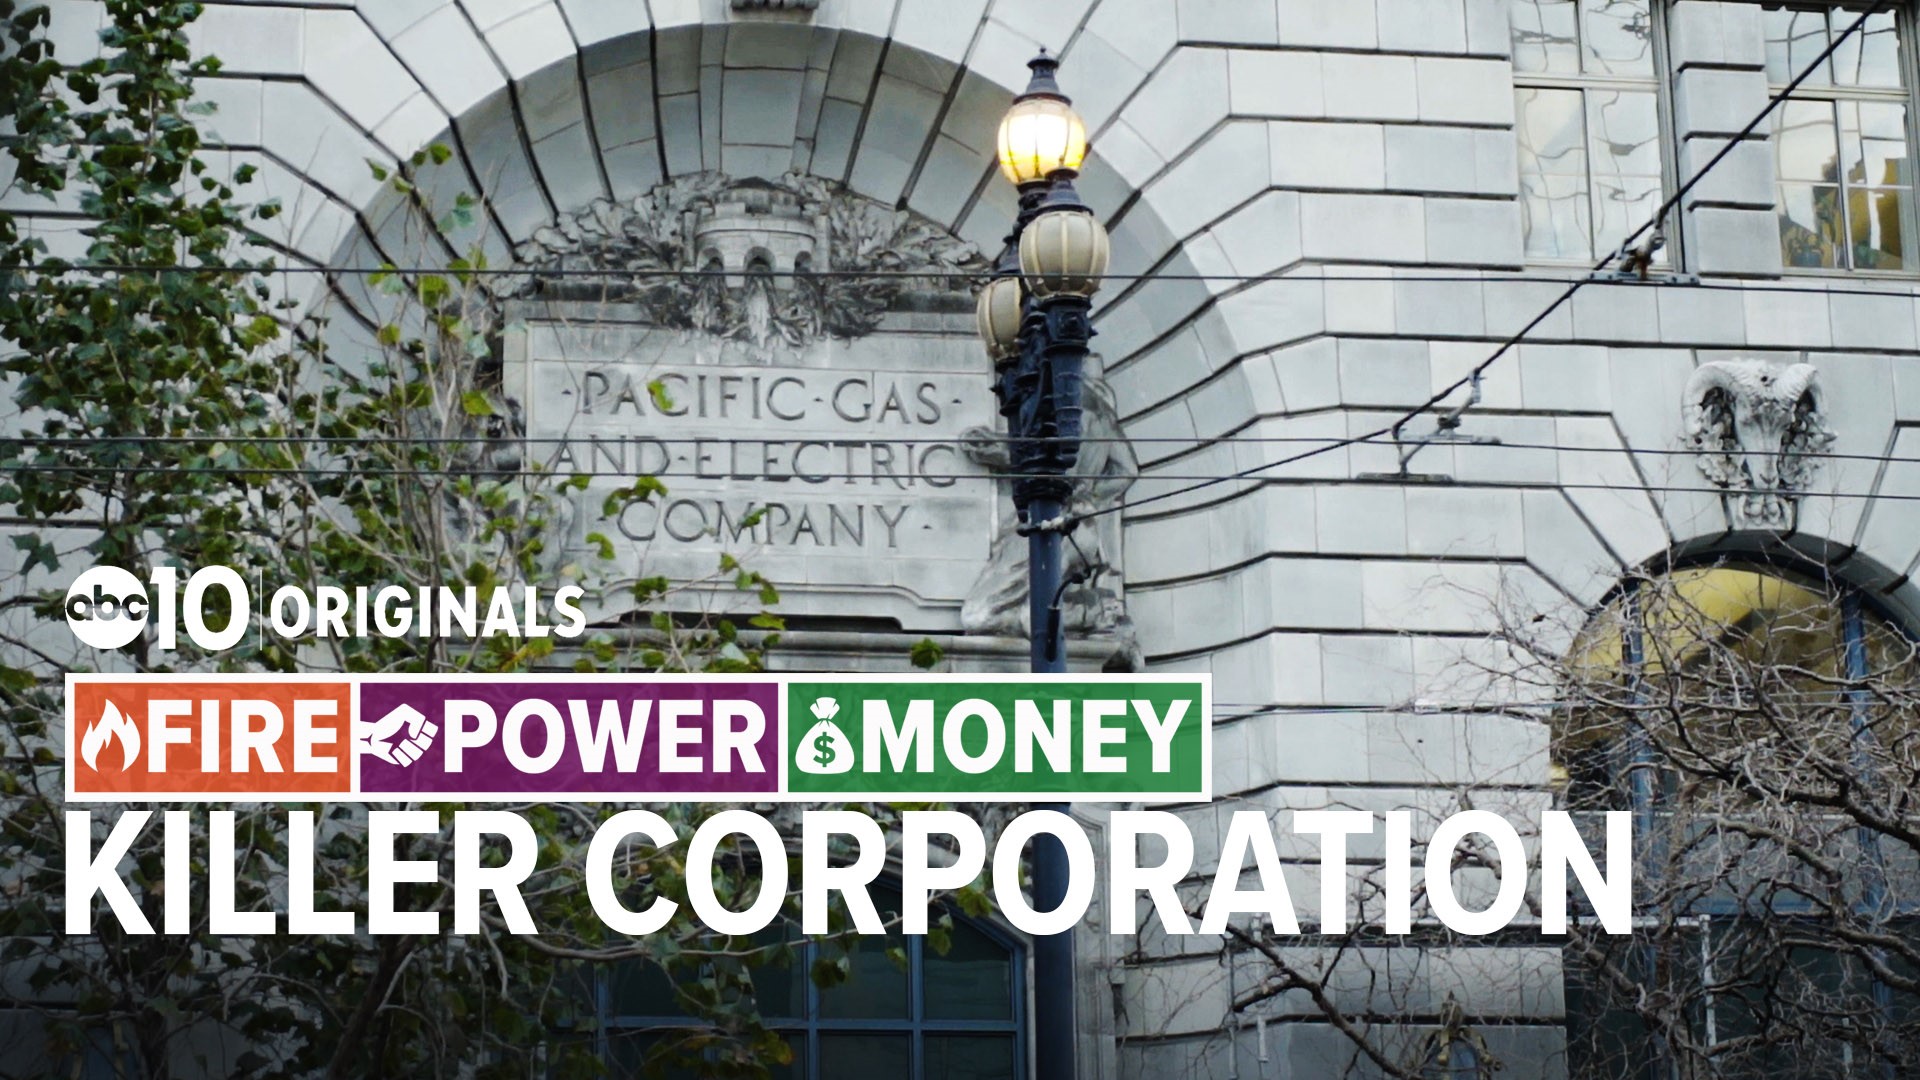 PG&E pleaded guilty as charged to the manslaughter of 84 people, but it tried to avoid being charged at all. We take you inside the criminal investigation.